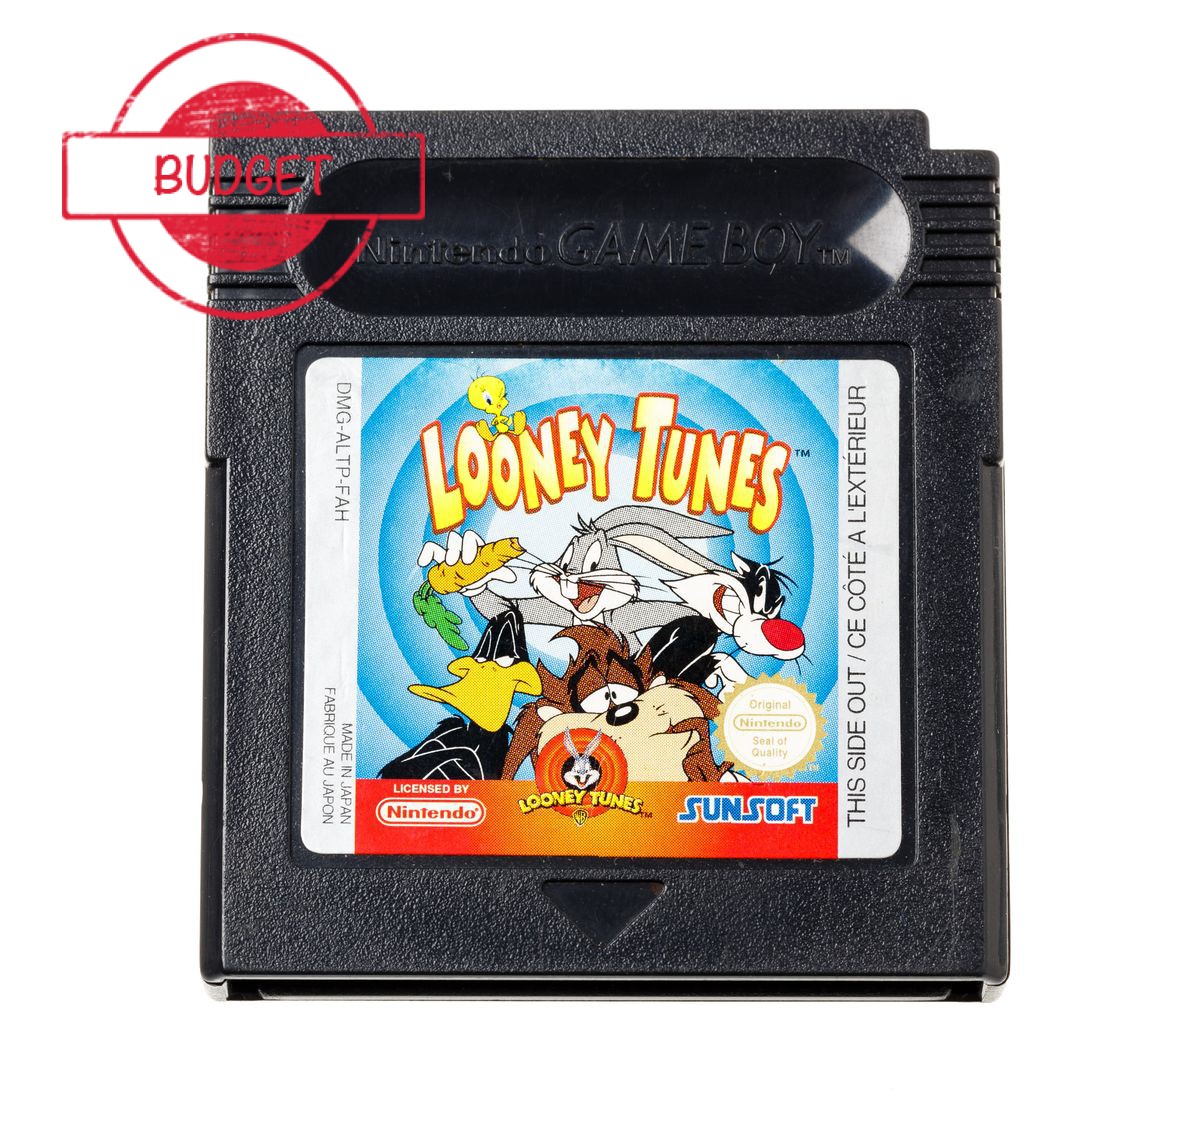 Looney Tunes - Budget - Gameboy Color Games